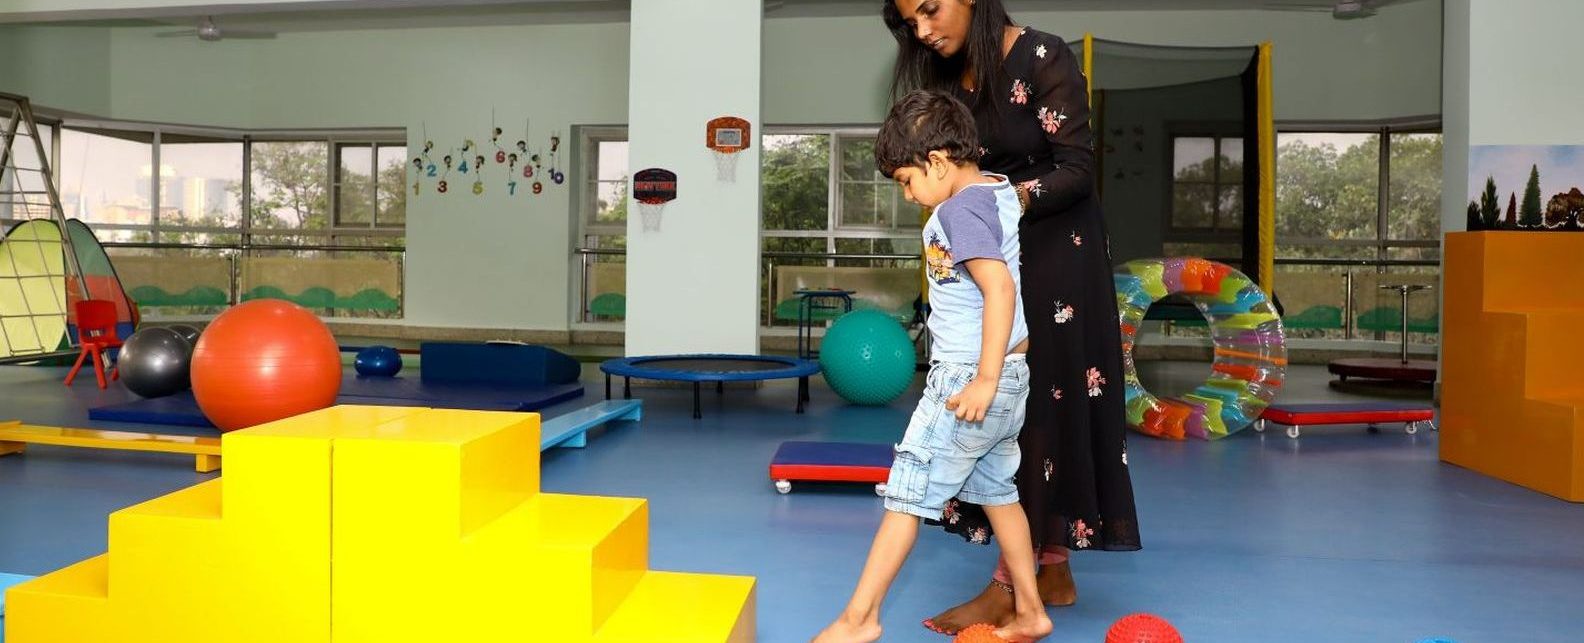 Occupational therapy dept - Helping to improve body balance, proprioception, abstract thinking, coordination in kids with ADHD & Autism with the therastones